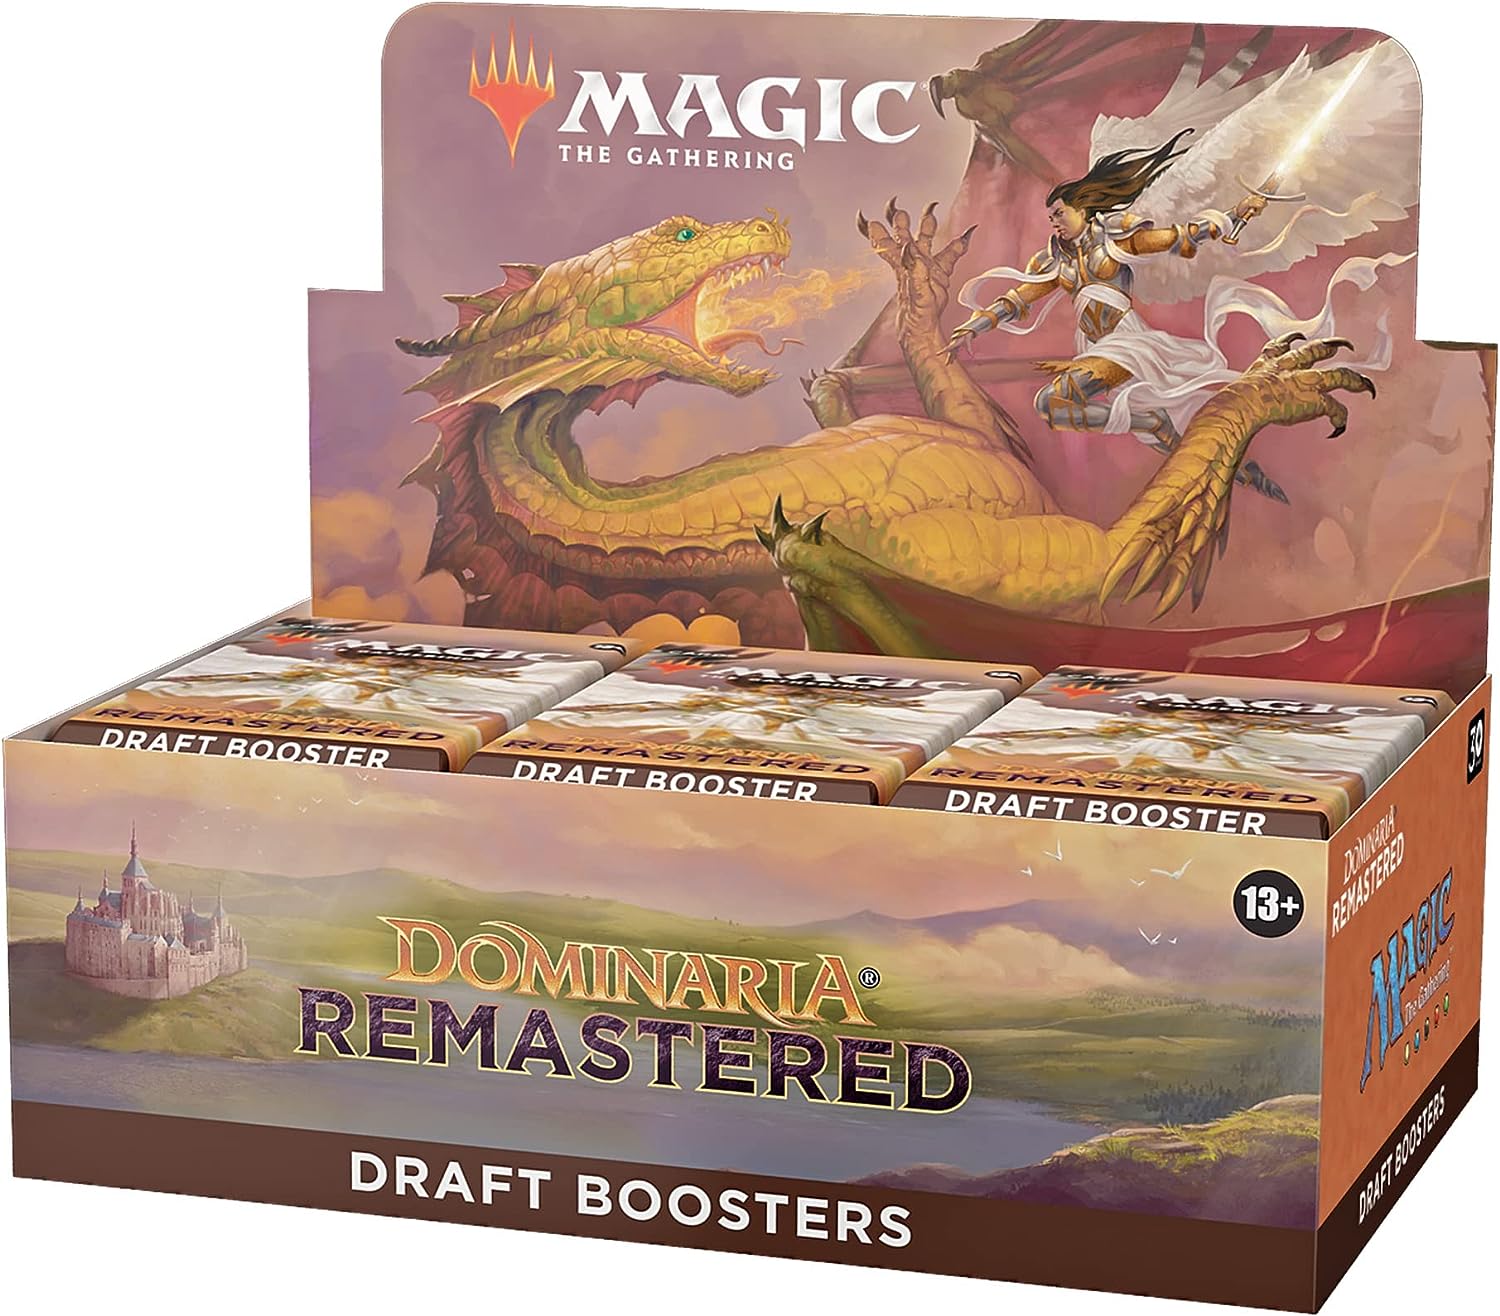 MAGIC THE GATHERING DOMINARIA REMASTERED DRAFT BOOSTER PACK